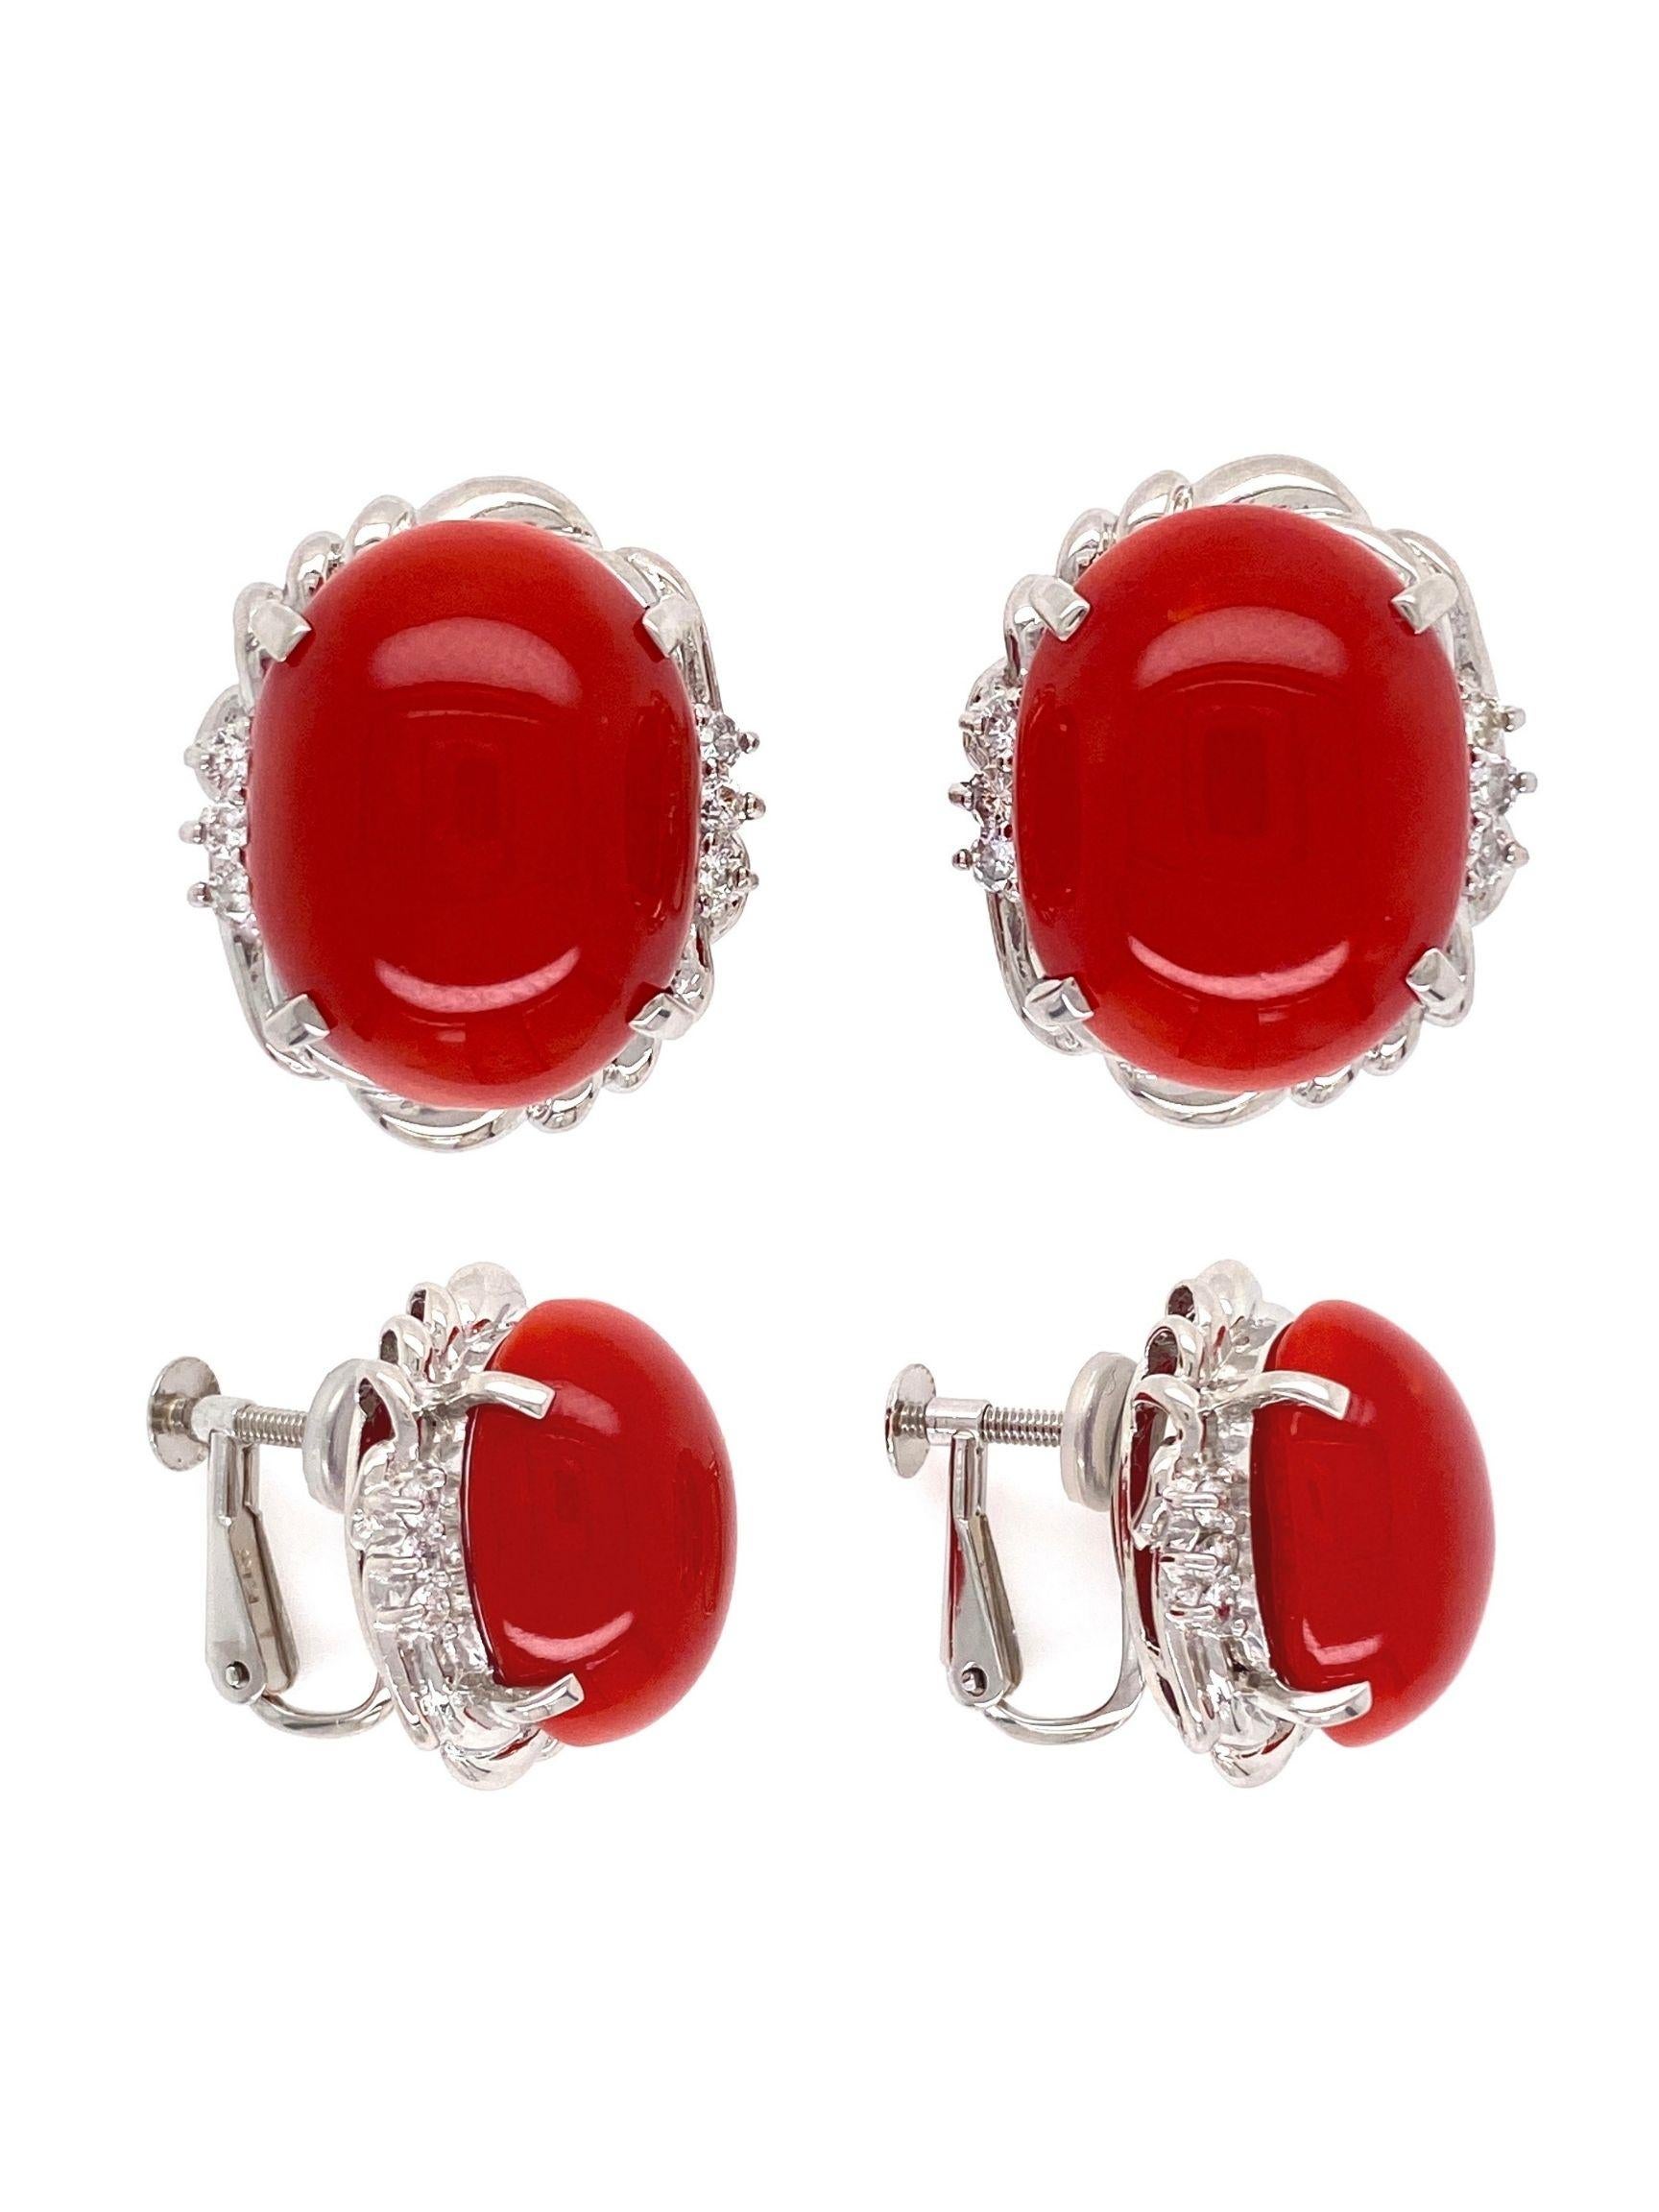 Simply Beautiful and finely detailed Retro style Red Coral and Diamond Earrings set with awesome cabochon Red Corals weighing approx. 18tcw and enhanced with 12 round brilliant-cut Diamonds weighing approx. 0.22tcw. Earrings Measure approx. 0.62